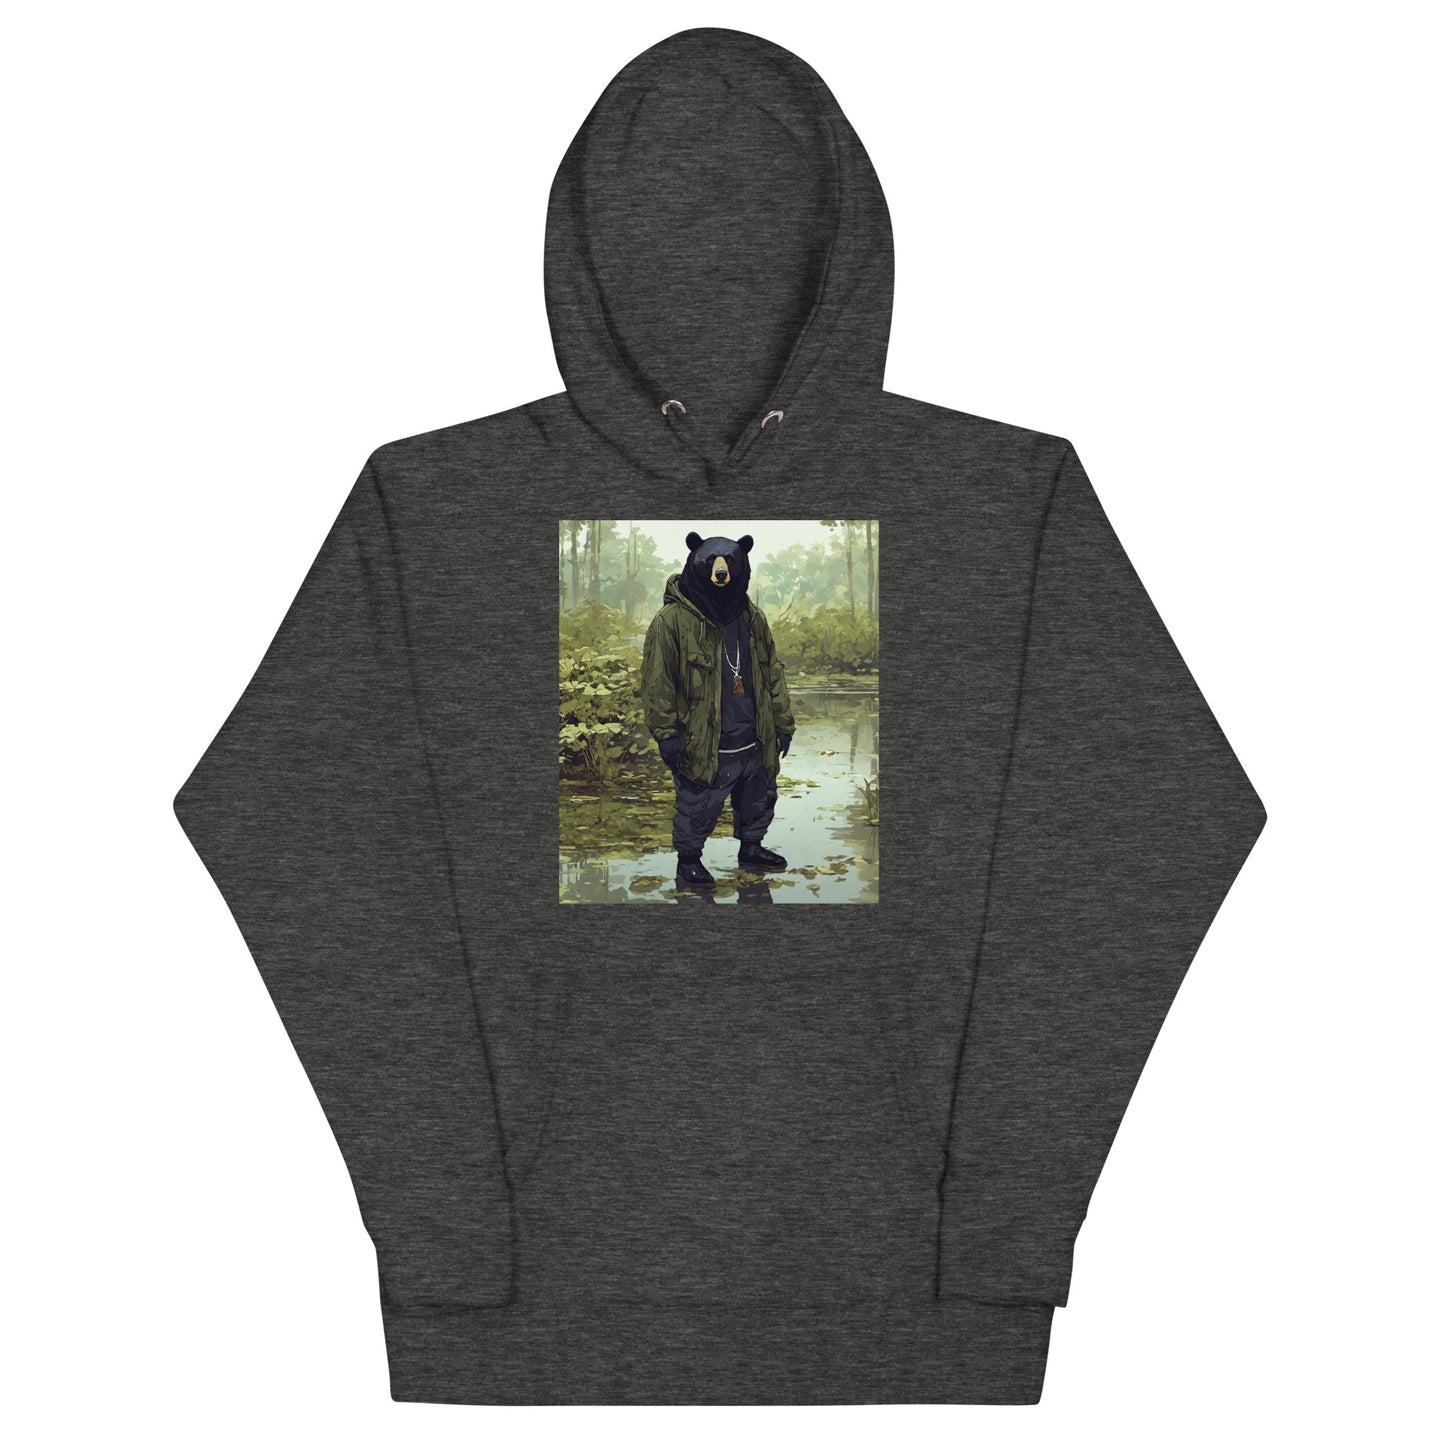 Stoic Black Bear Graphic Hoodie Charcoal Heather